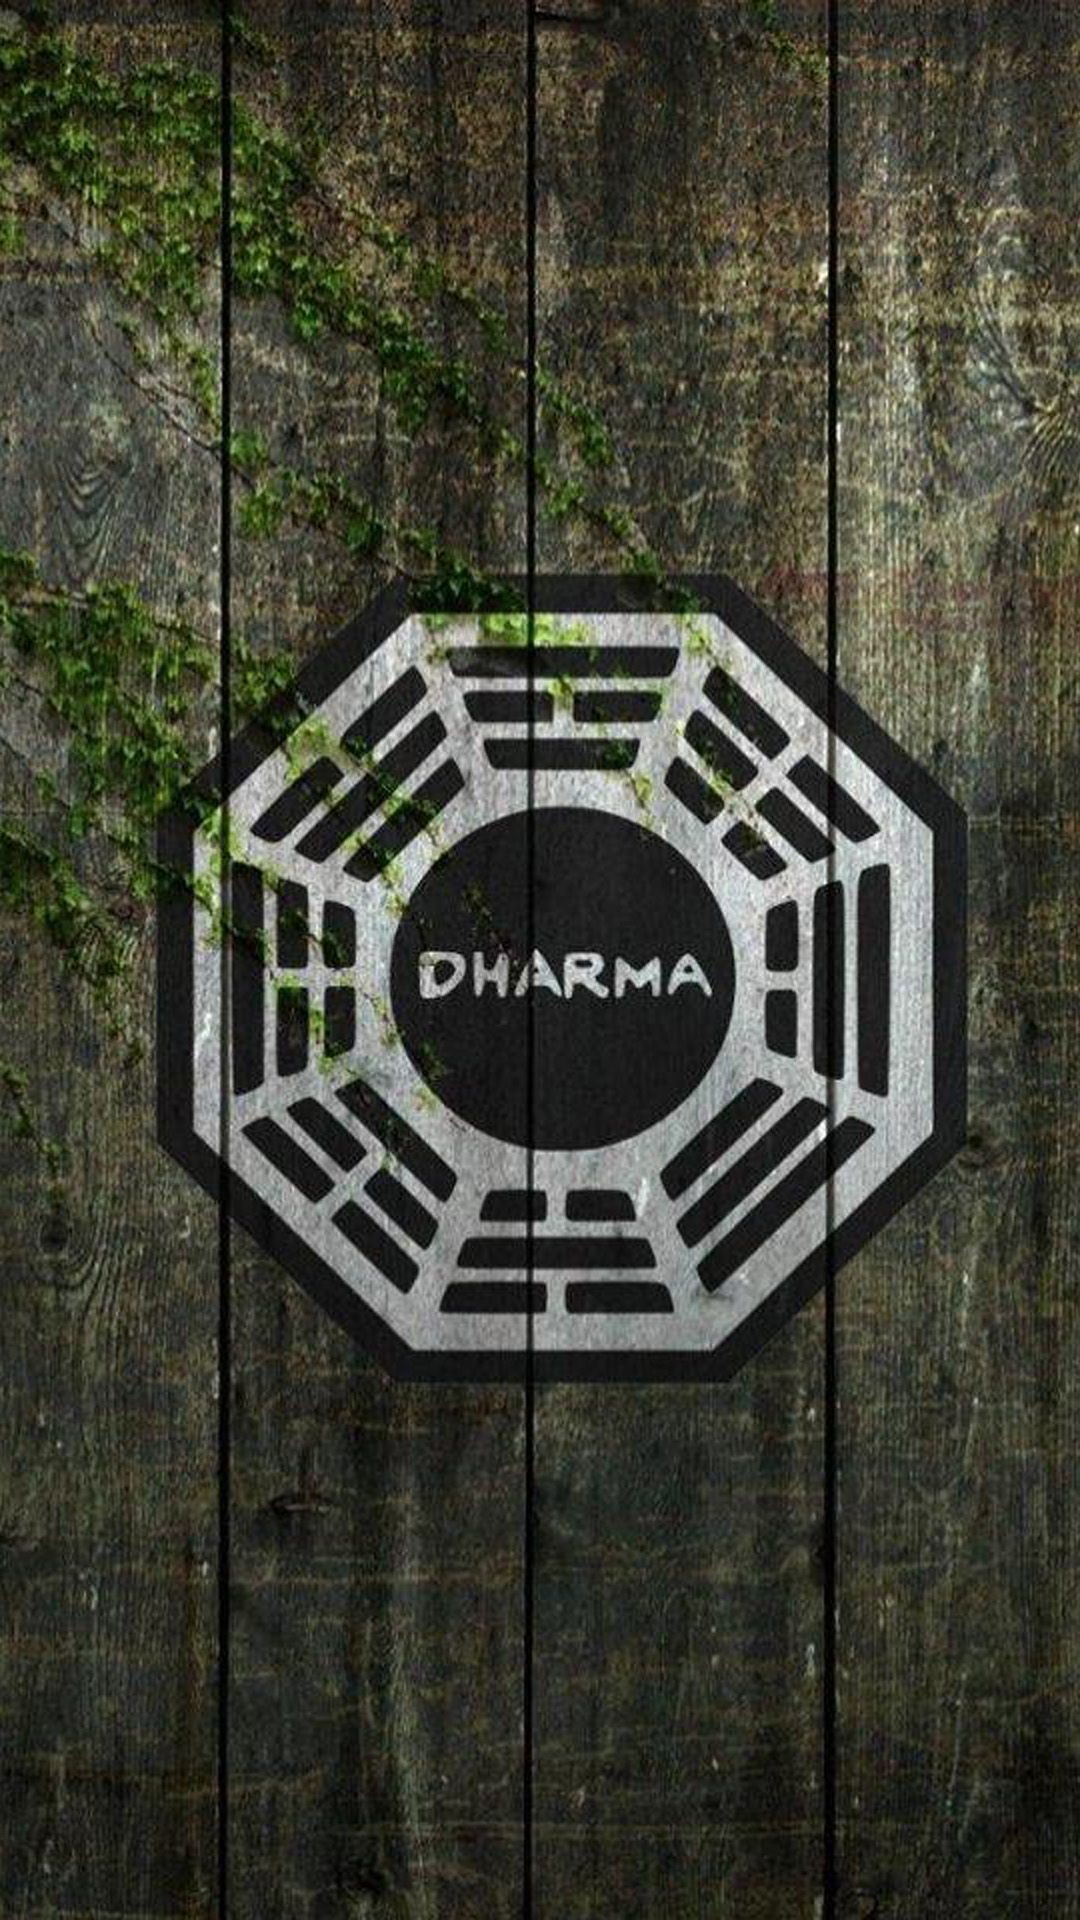 1080x1920 Dharma Initiative - Best htc one wallpapers, free and easy to download